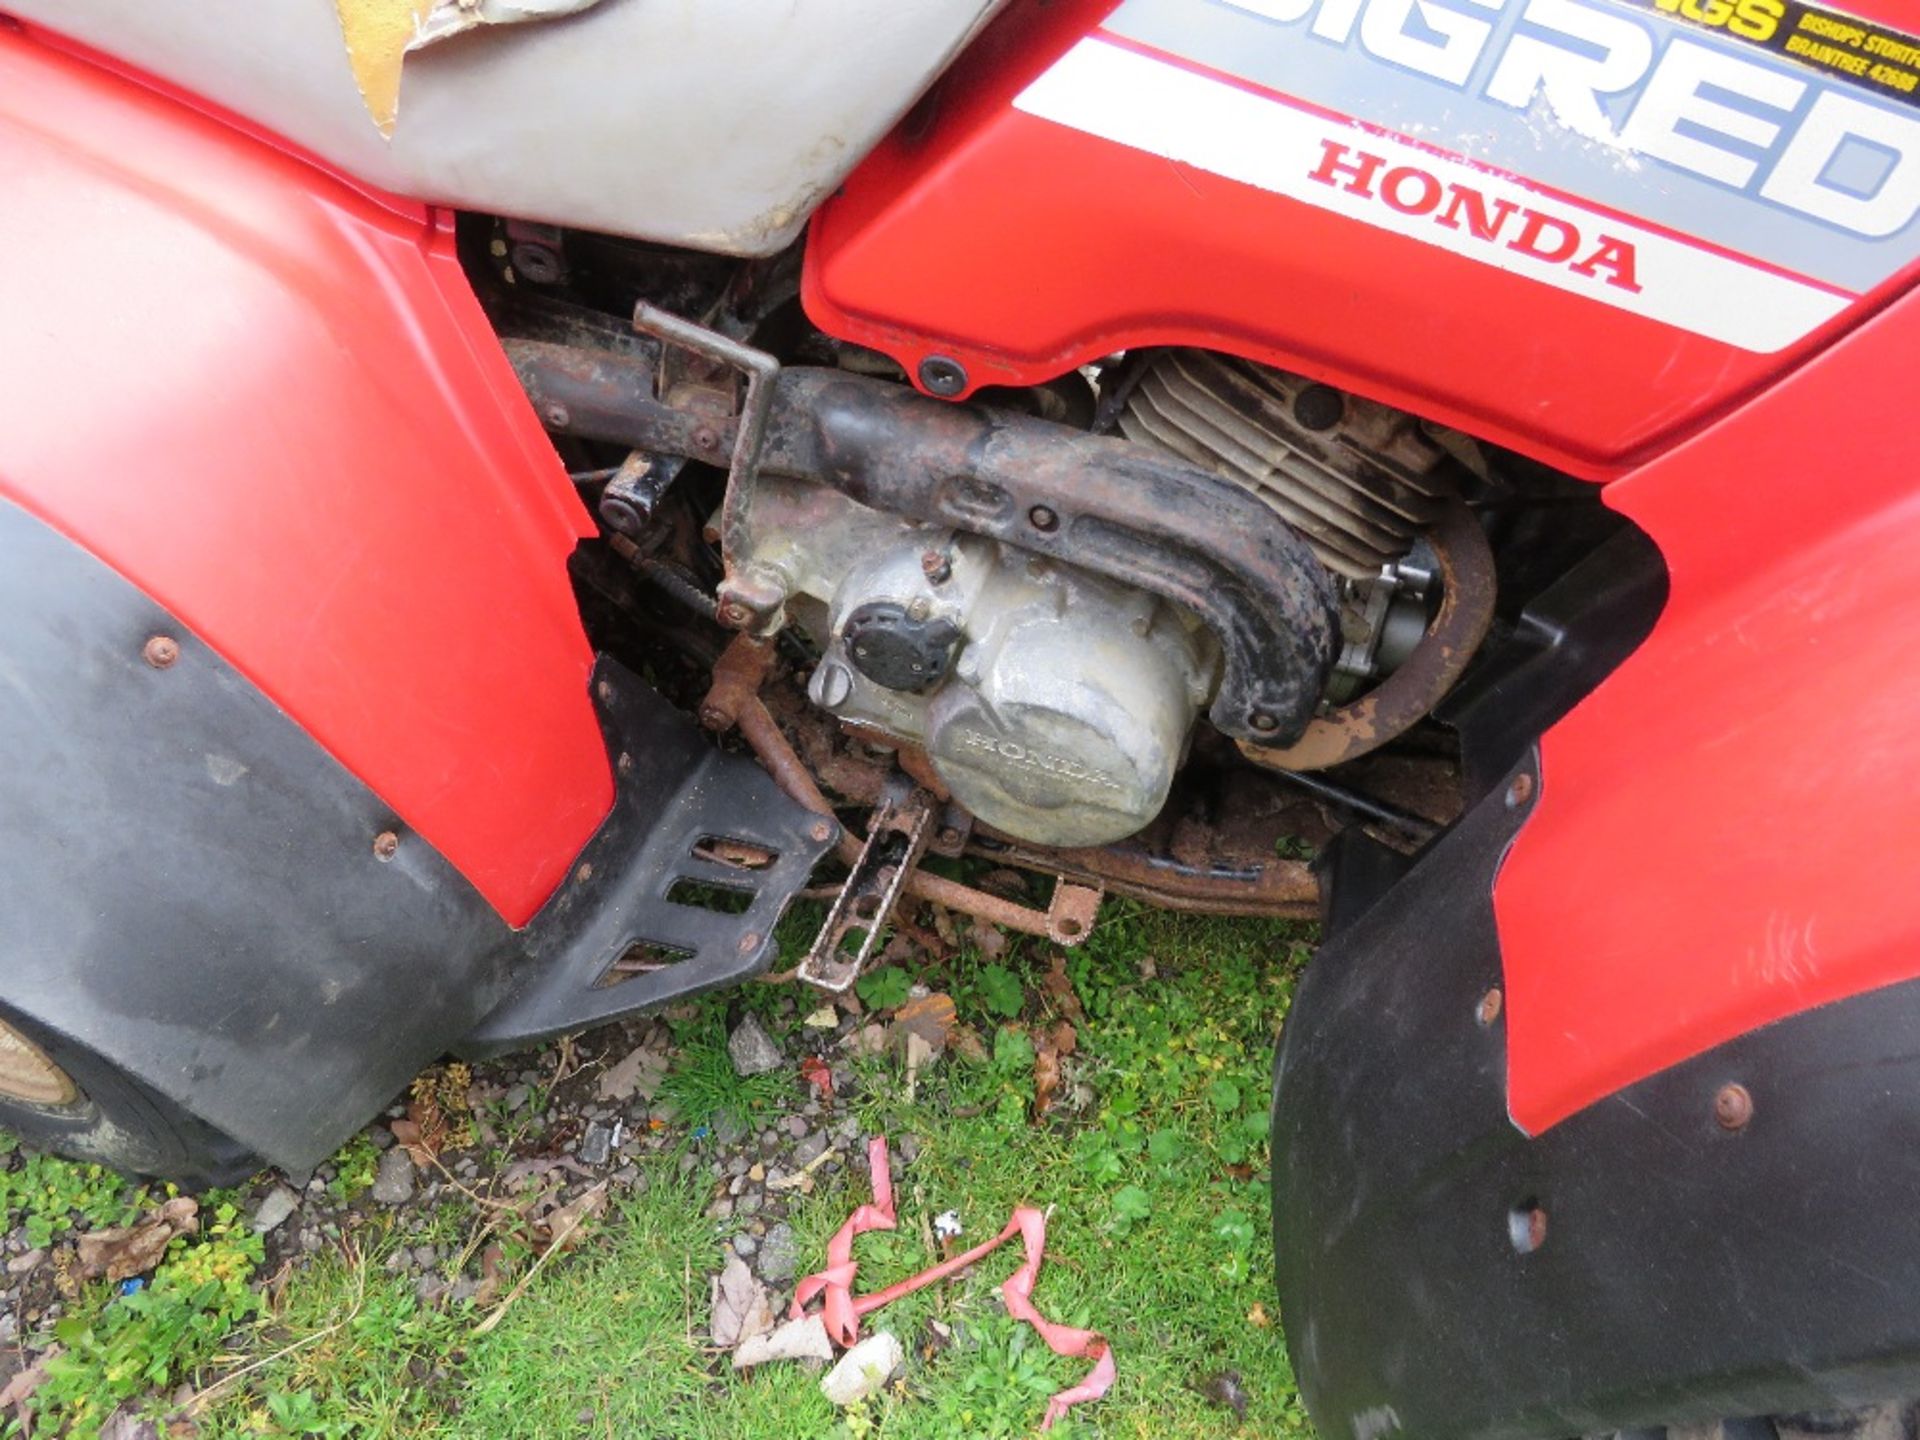 HONDA BIG RED 4WD PETROL ENGINED QUAD BIKE. WHEN TESTED WAS SEEN TO DRIVE, STEER AND BRAKE SOURCED F - Image 9 of 9